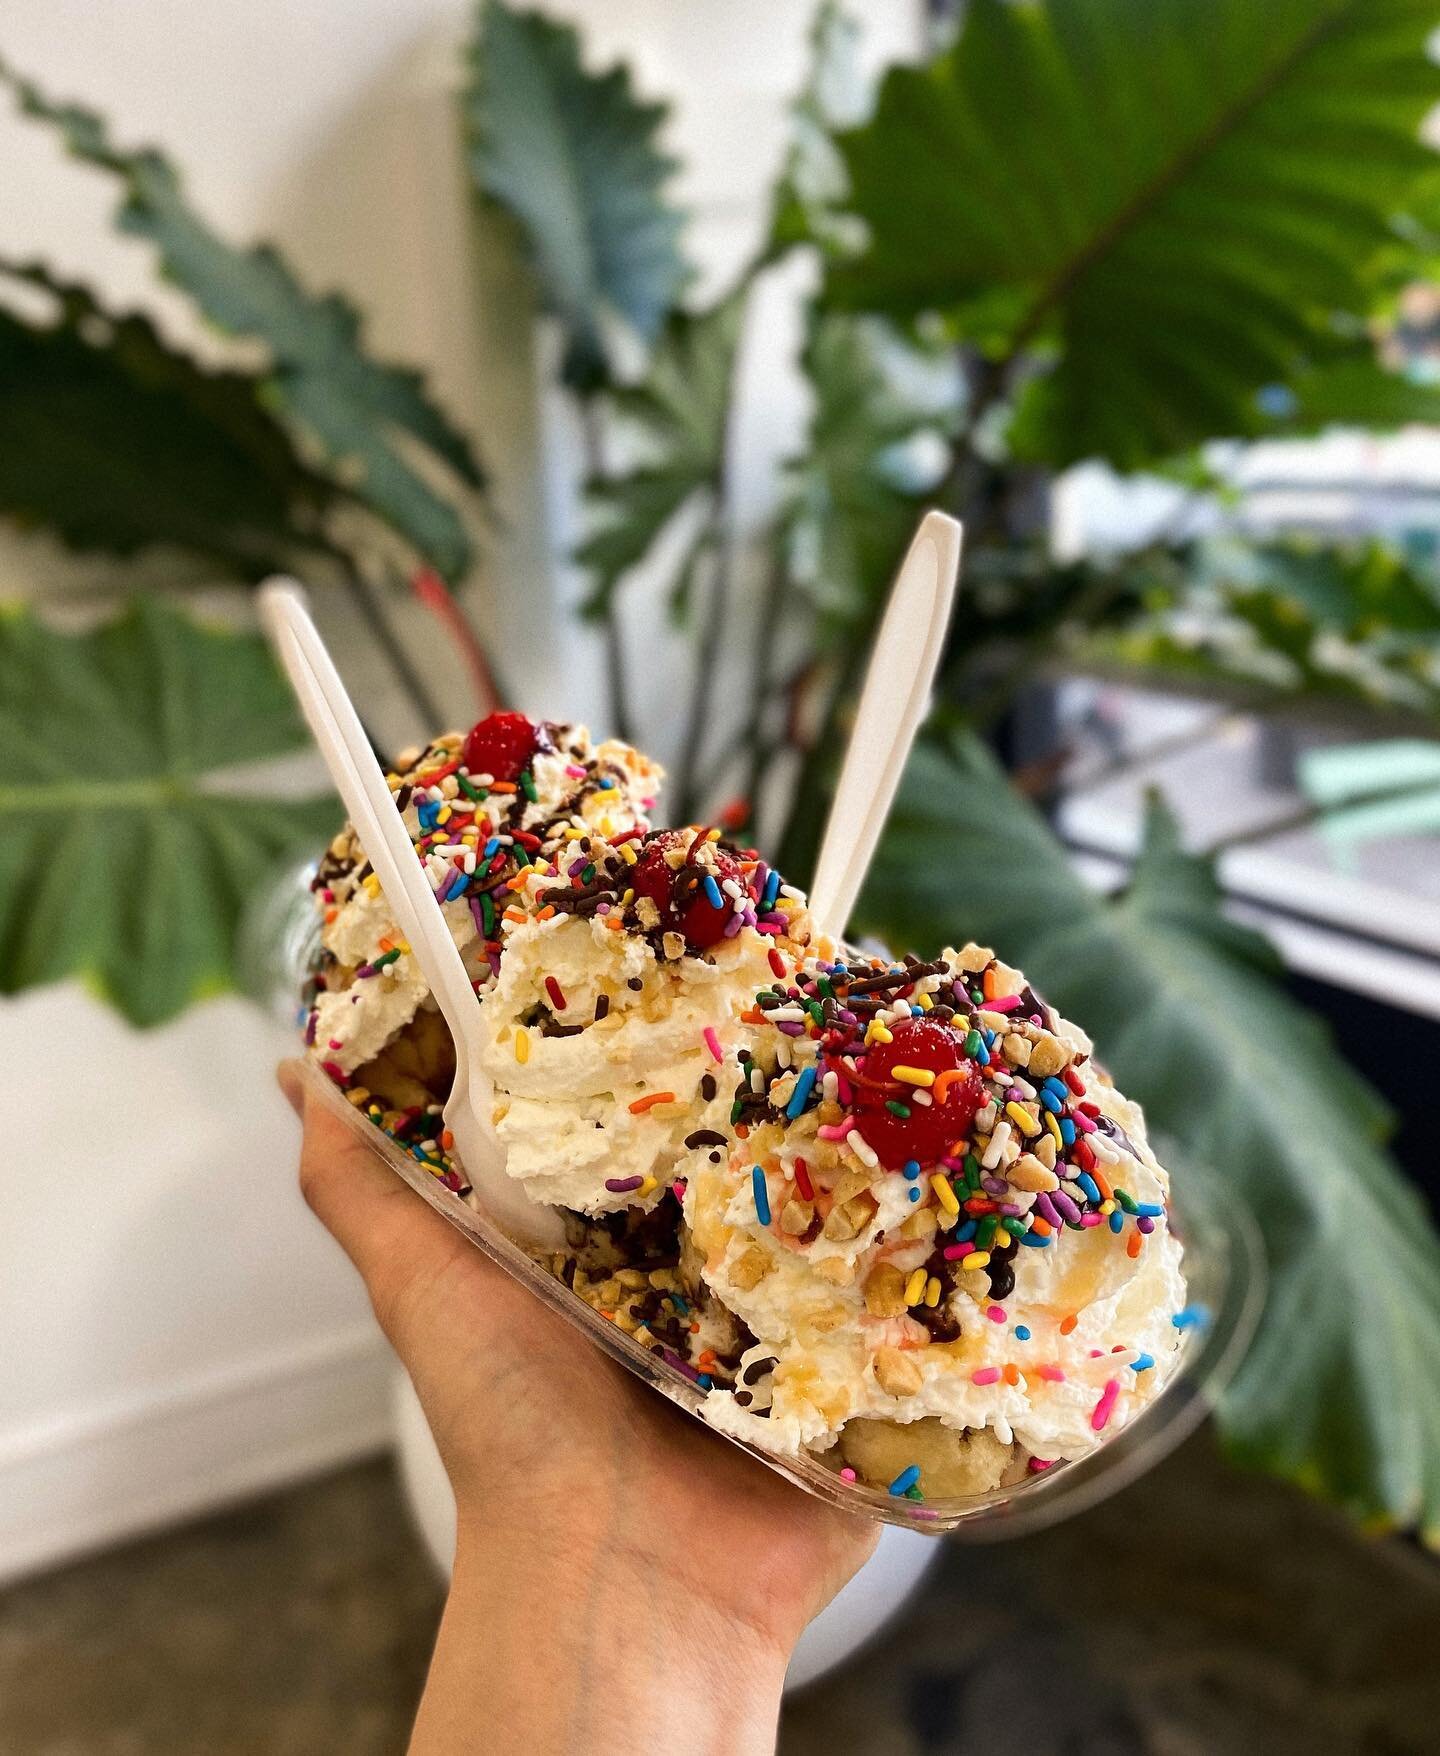 Happy #fathersday 🫶🏼 Come by today and try one of our banana splits, perfect for sharing with your loved ones! 🍌
.
.
.
.
.
.
.
.
.
.
.
.
.
.
.
.
.
.
.
.
.
.
.
#icecream #banana #sweettooth #bayarea #bayareafoodie #oakland #bayareabites #dessert #e